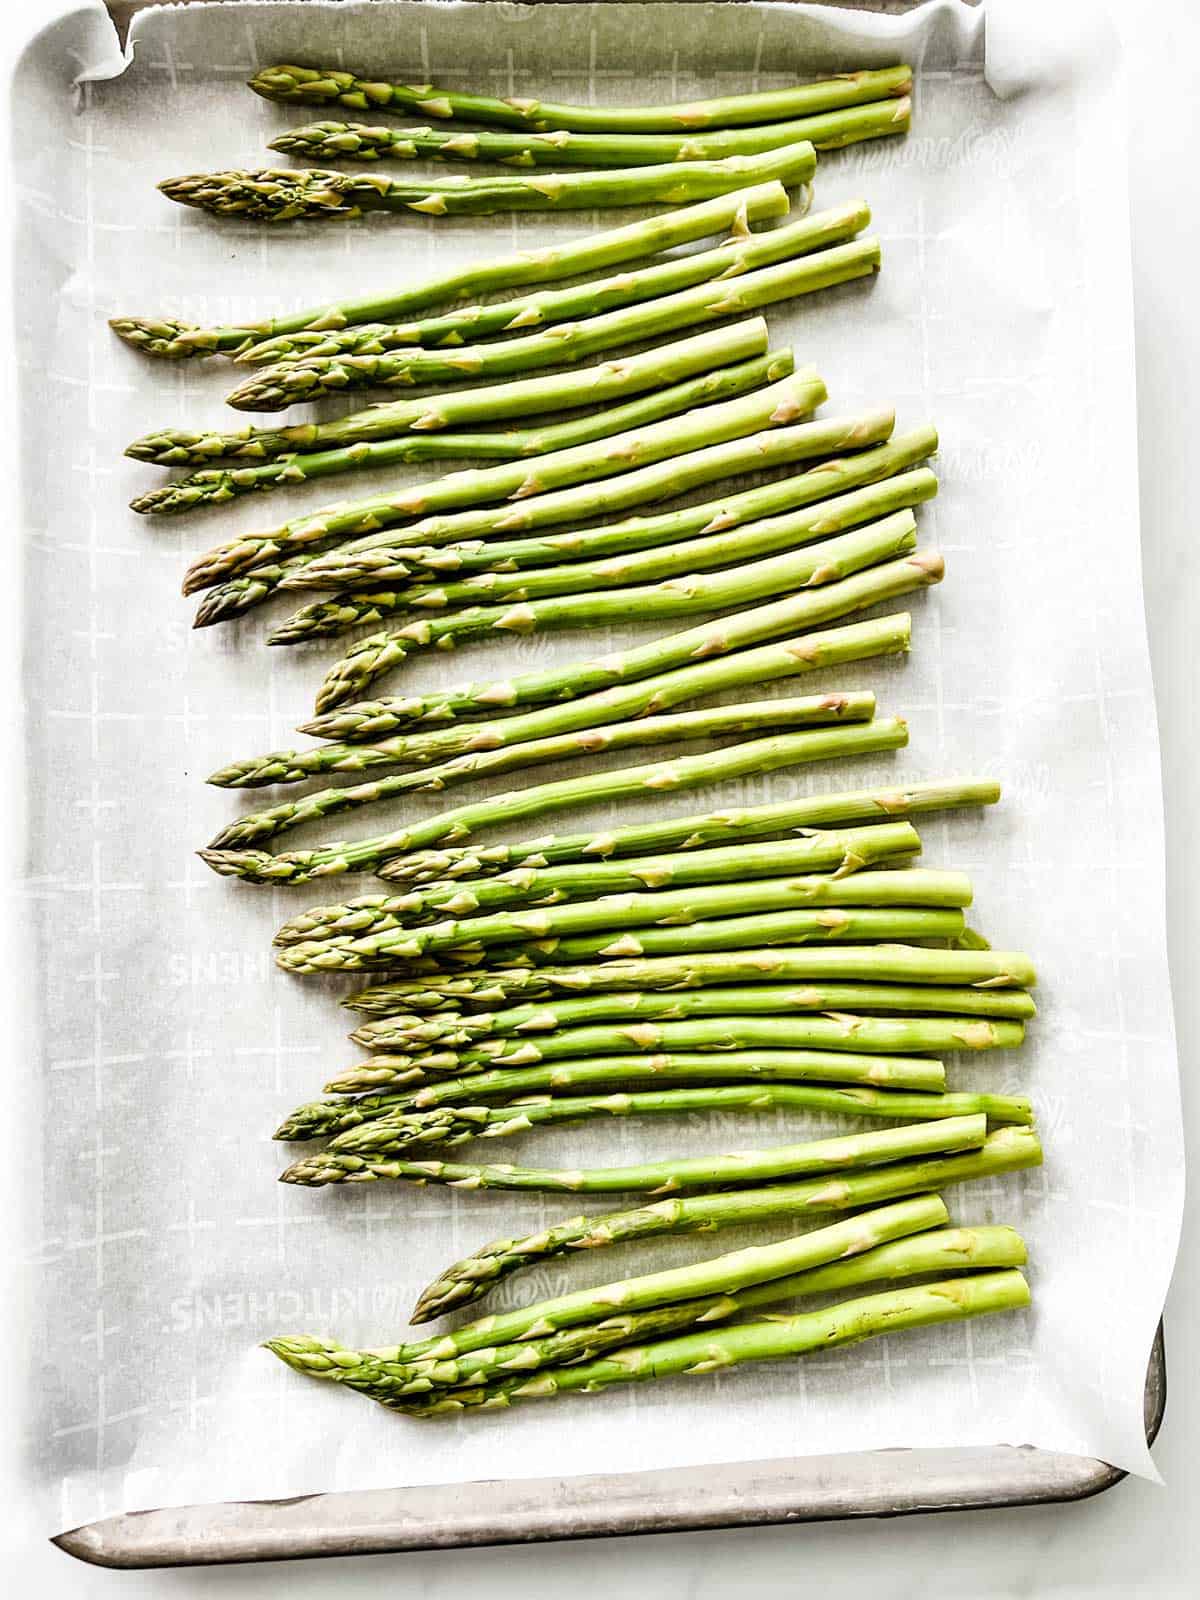 Parchment lined sheet pan with asparagus on it.